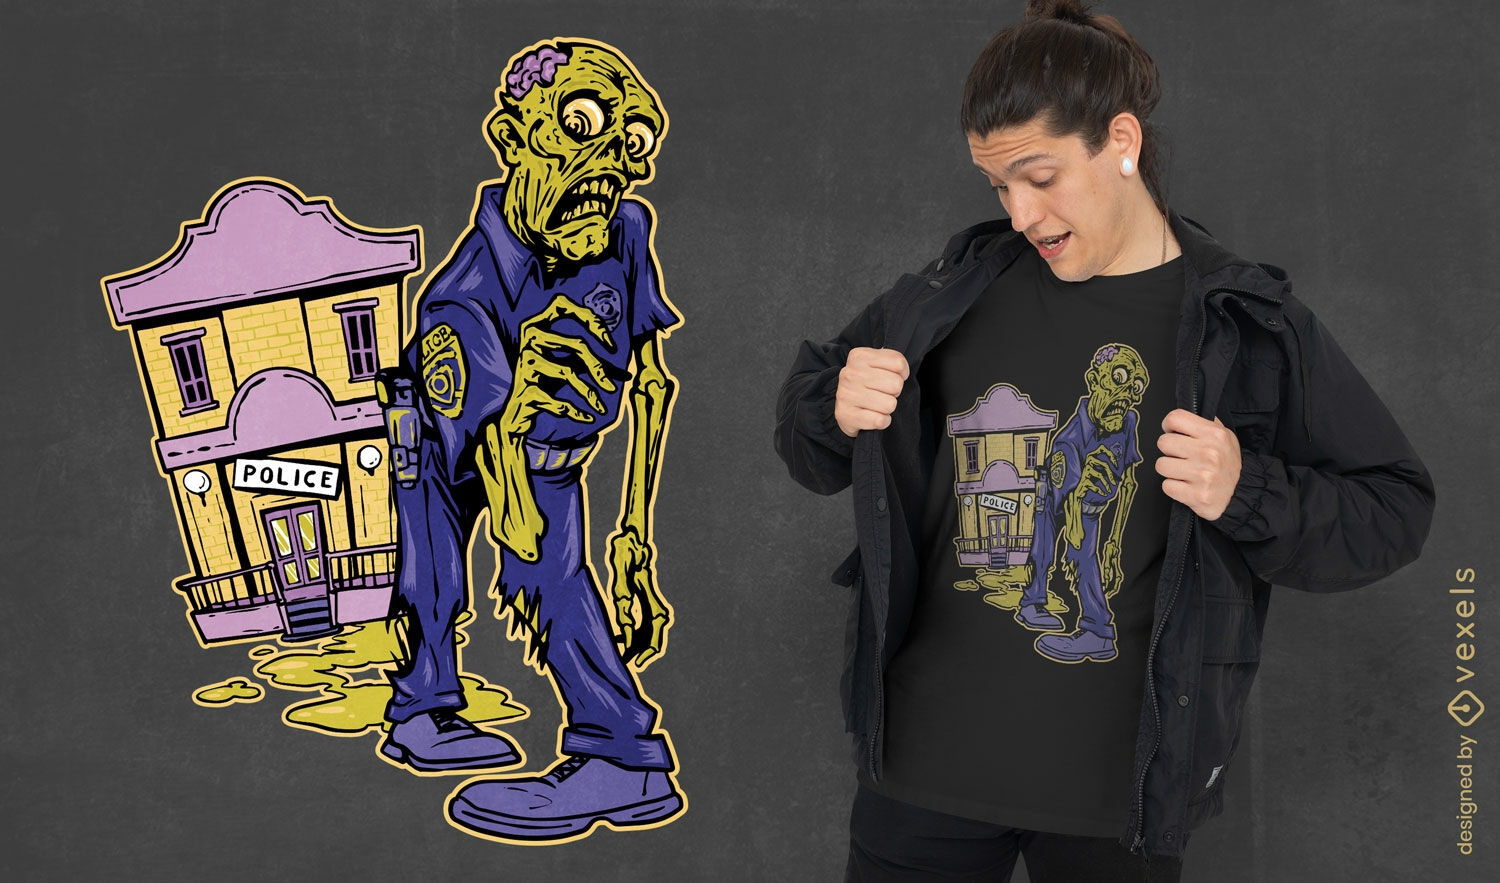 Zombie police officer t-shirt design